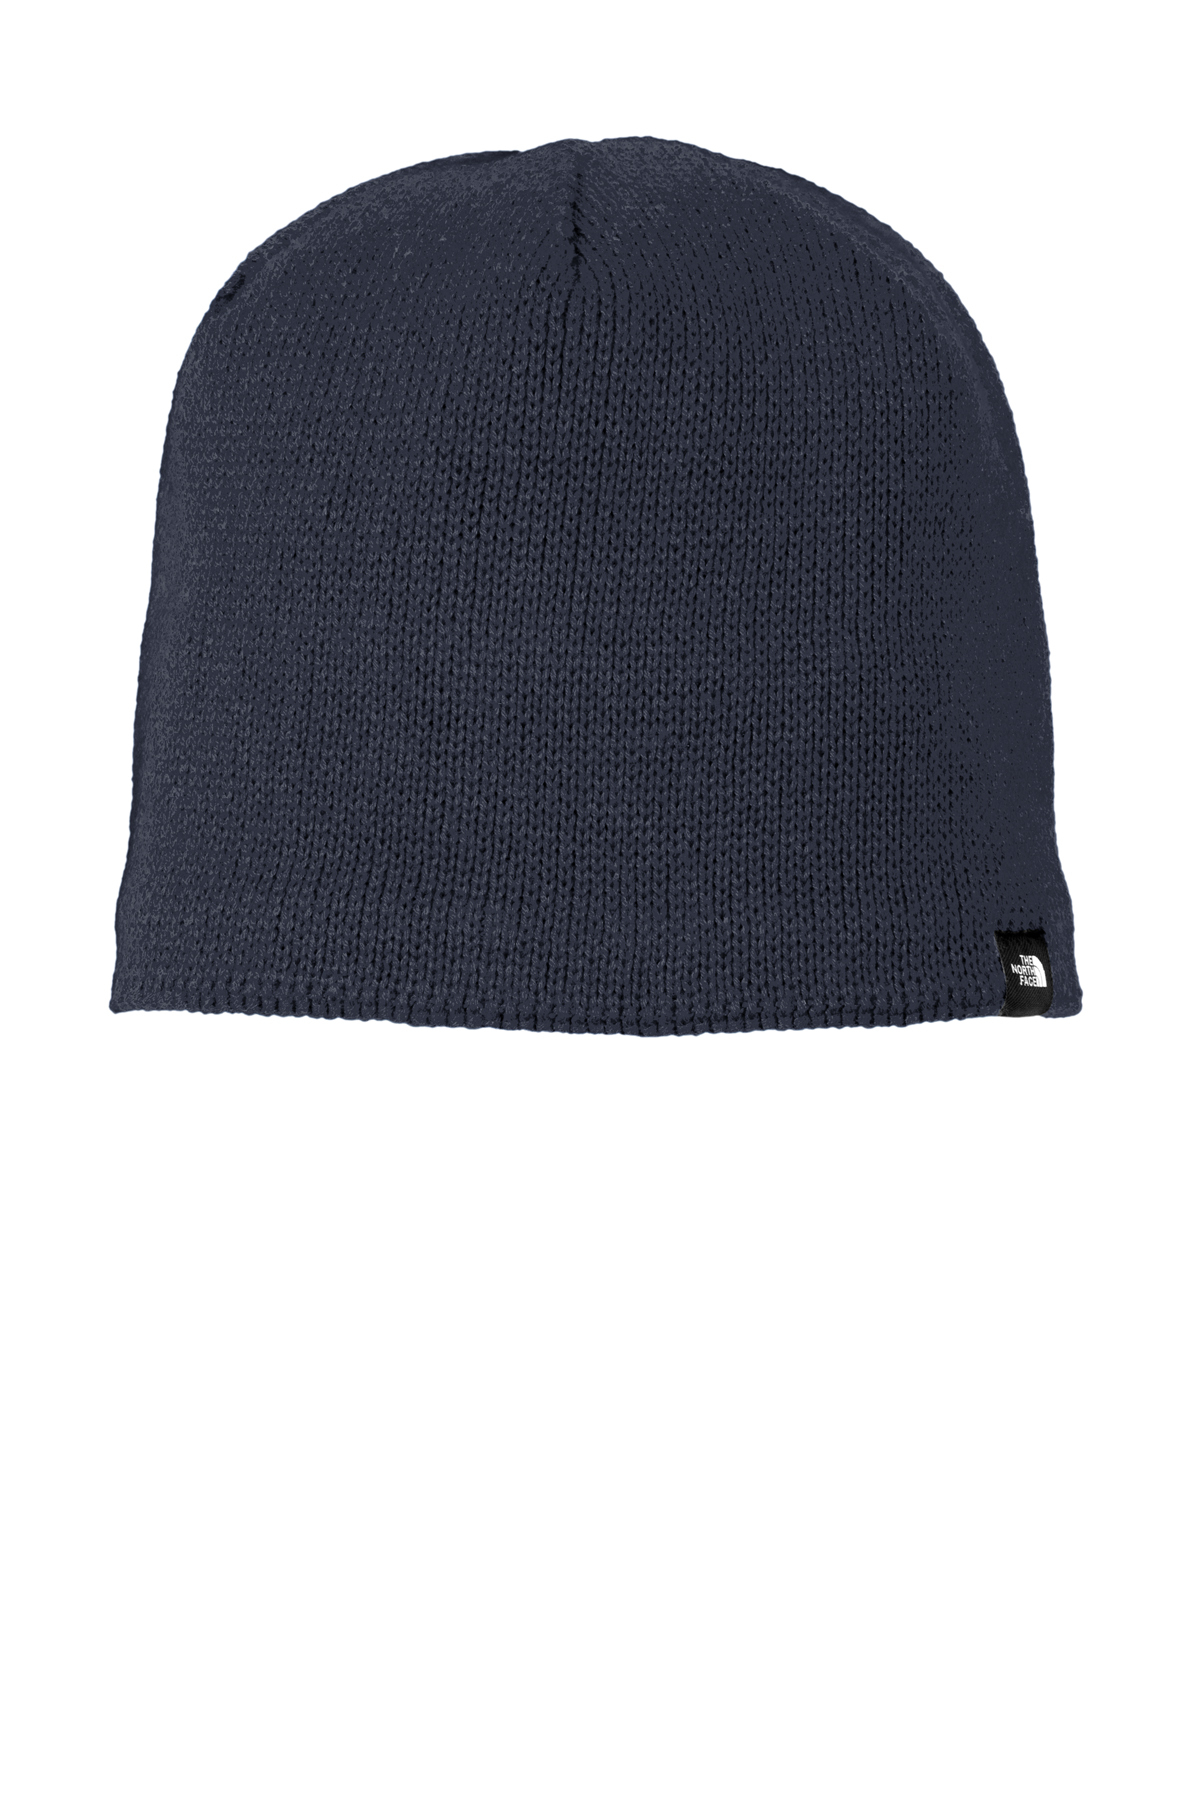 SanMar North The Mountain Product Beanie | Face |